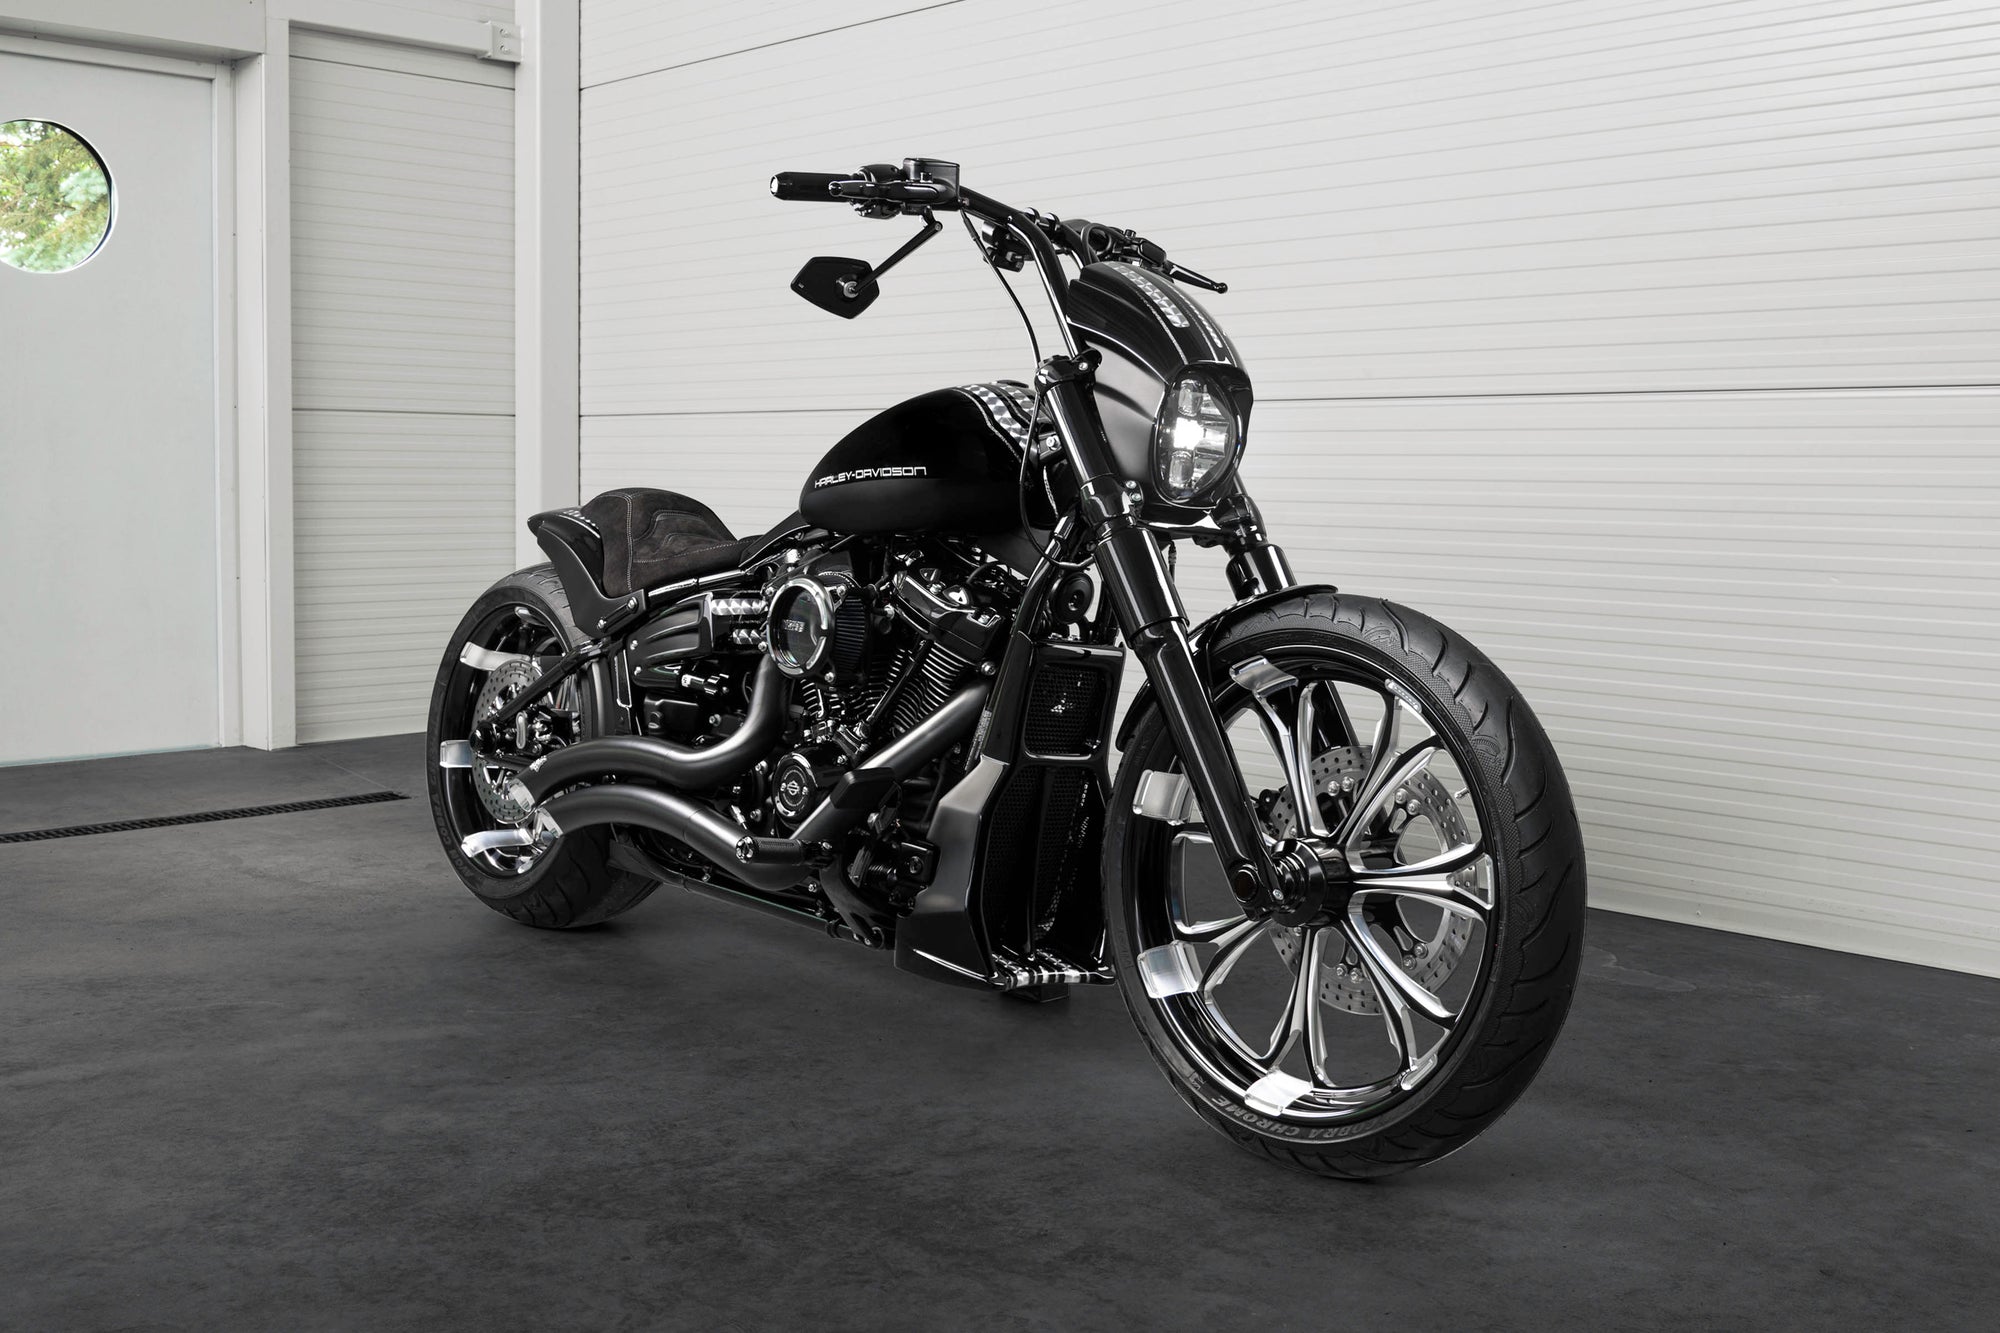 Harley Davidson motorcycle with Killer Custom parts from the front in a white modern bike shop